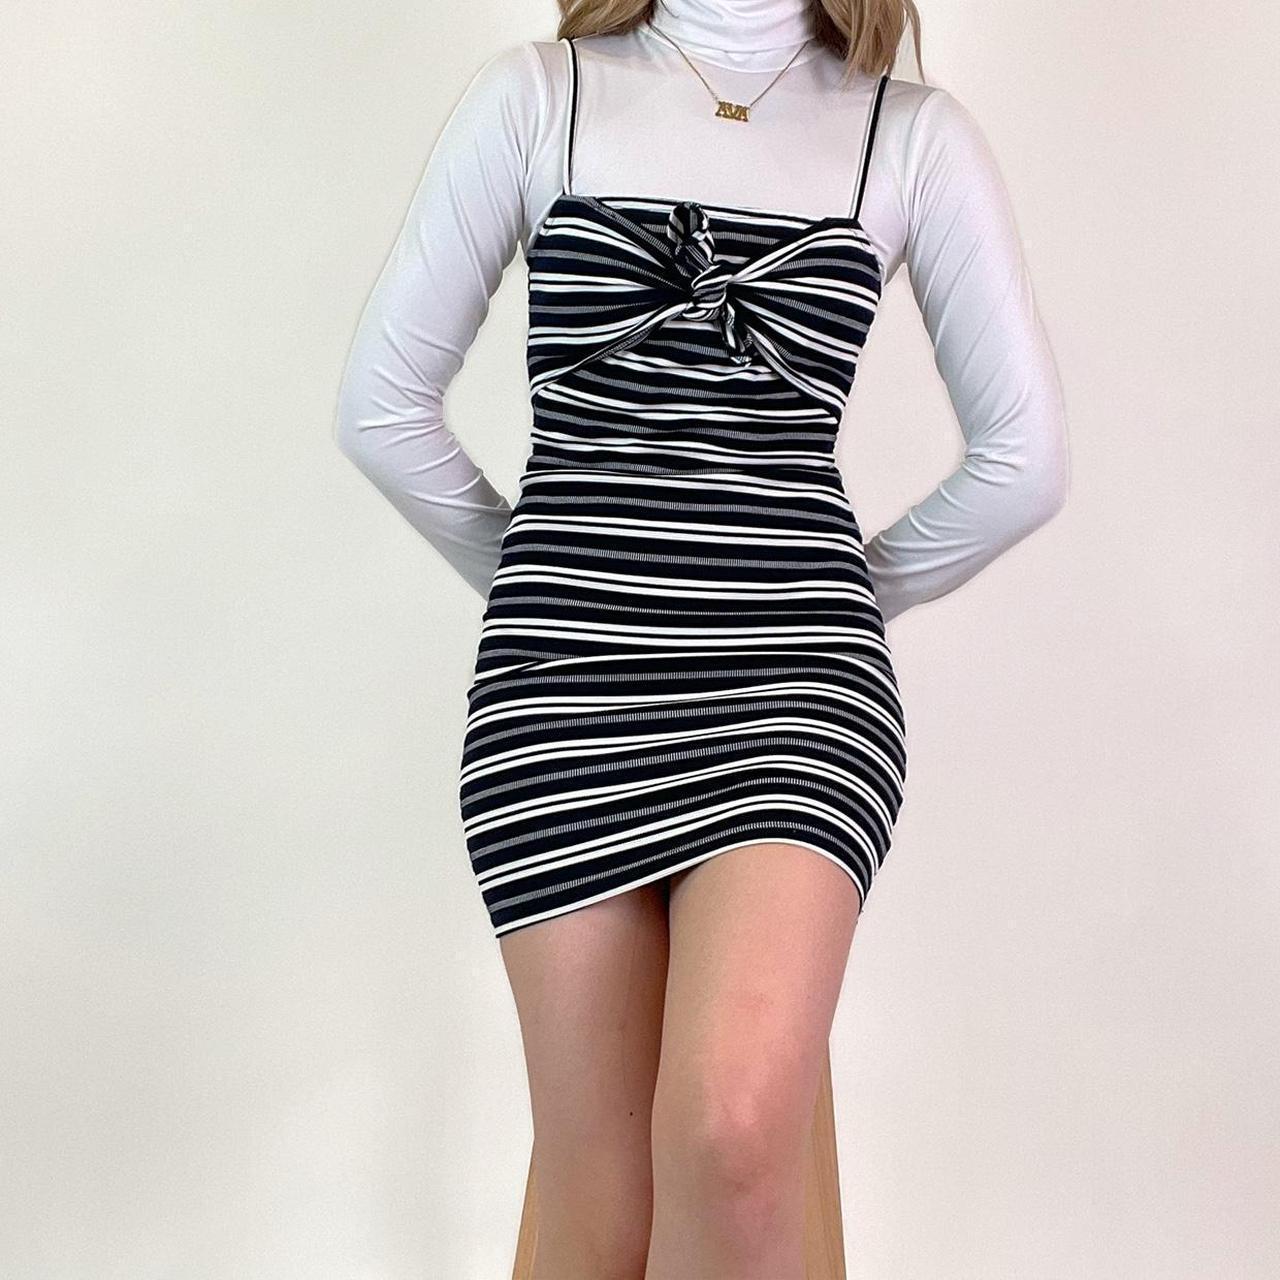 Product Image 2 - Navy and white striped bodycon